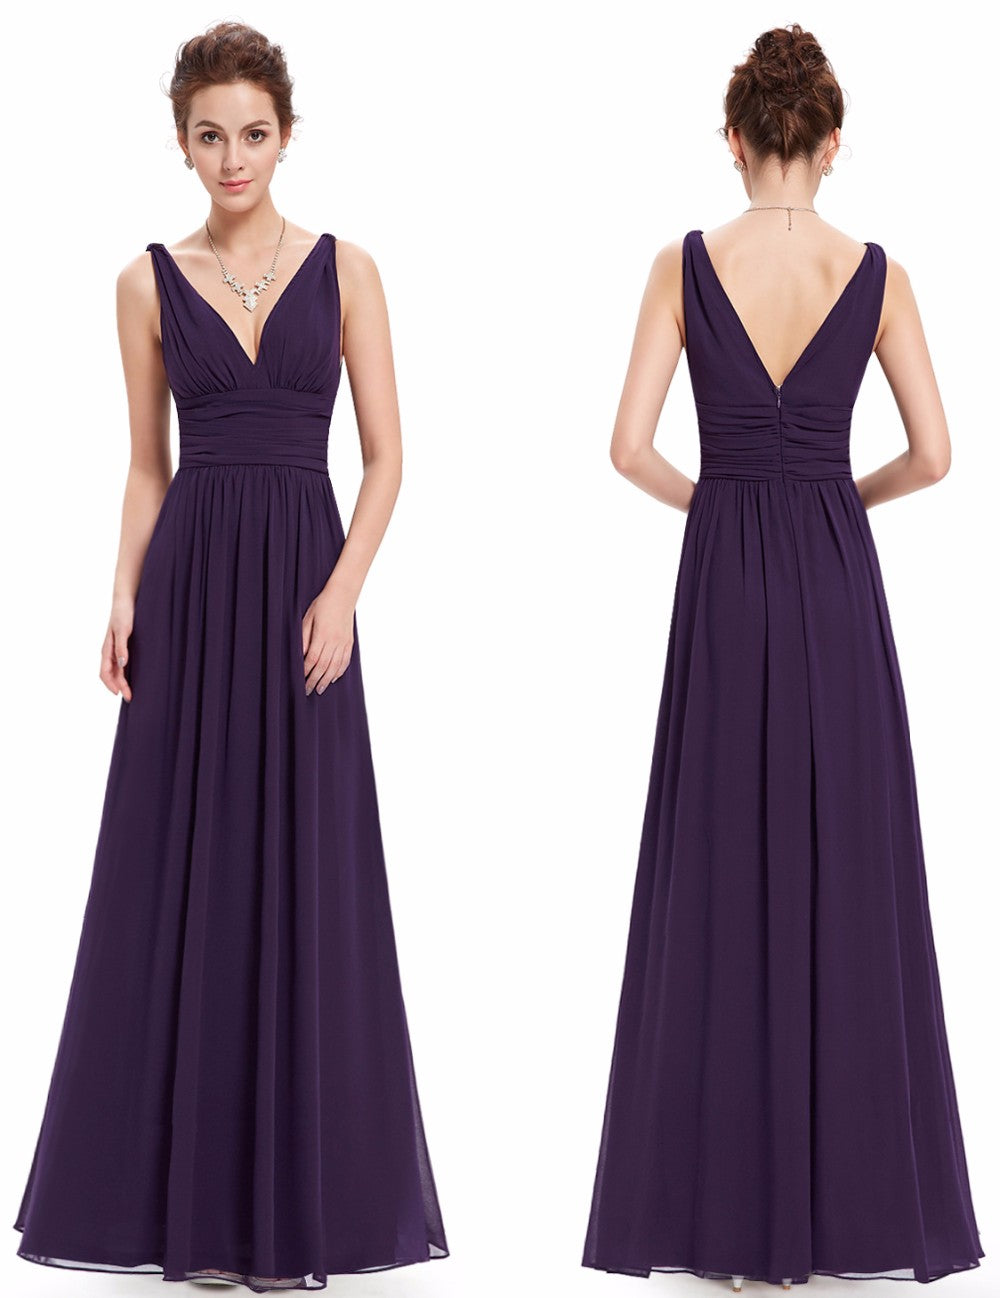 Double Deep  V Long Formal Bridesmaid Dresses for 2018 - Available in 7 Colors!